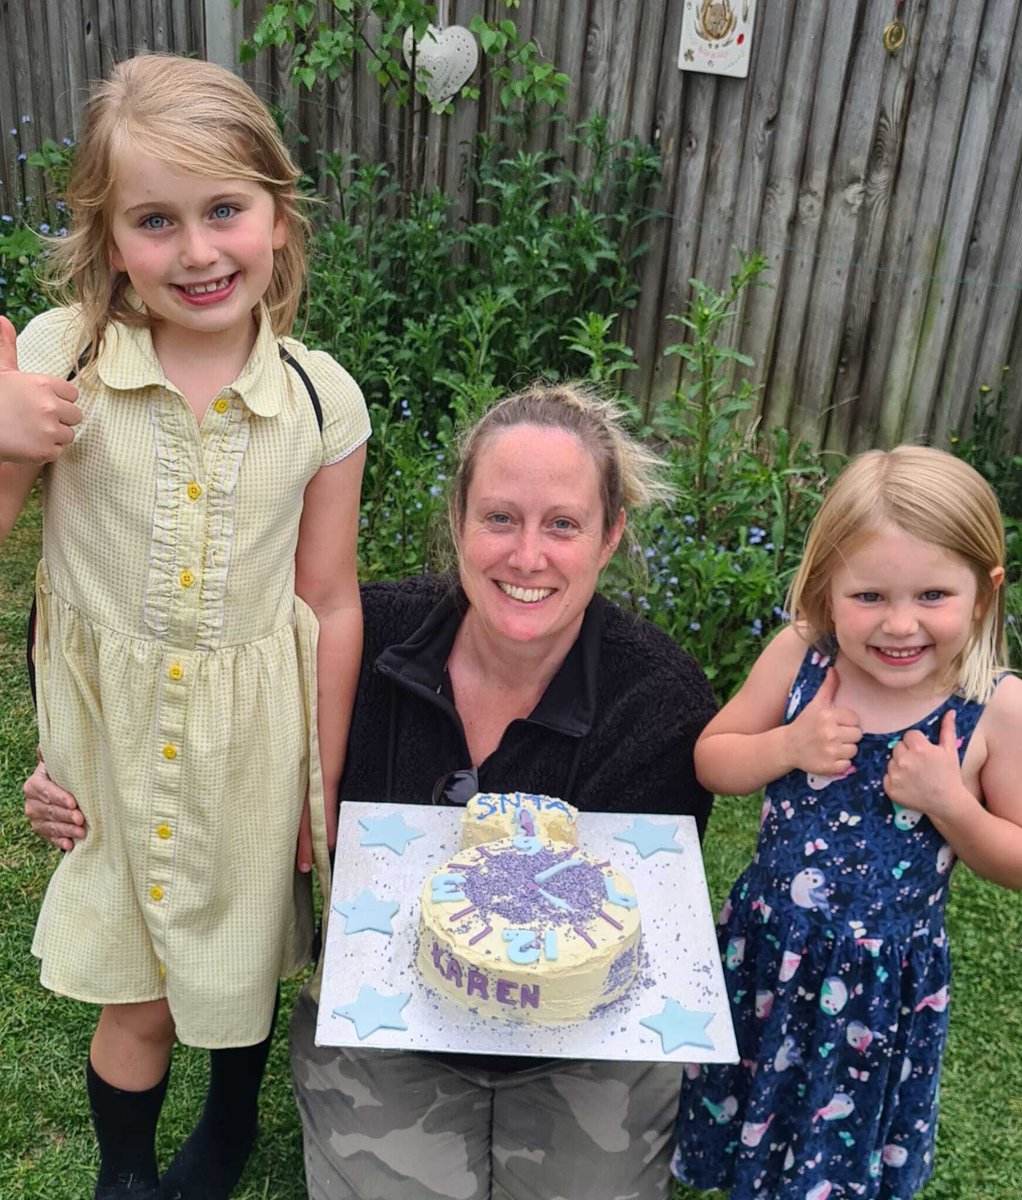 Karen, a Nursing Associate from our #Surbiton Home, and her neighbours baked this fantastic 'Nurse's fob watch' for our entry to the #SNTAbake competition. 
🧁🏆

She said: 'We had great fun and the cake not only looked great, but tasted delicious.'

Wish us luck! @NursingTimes